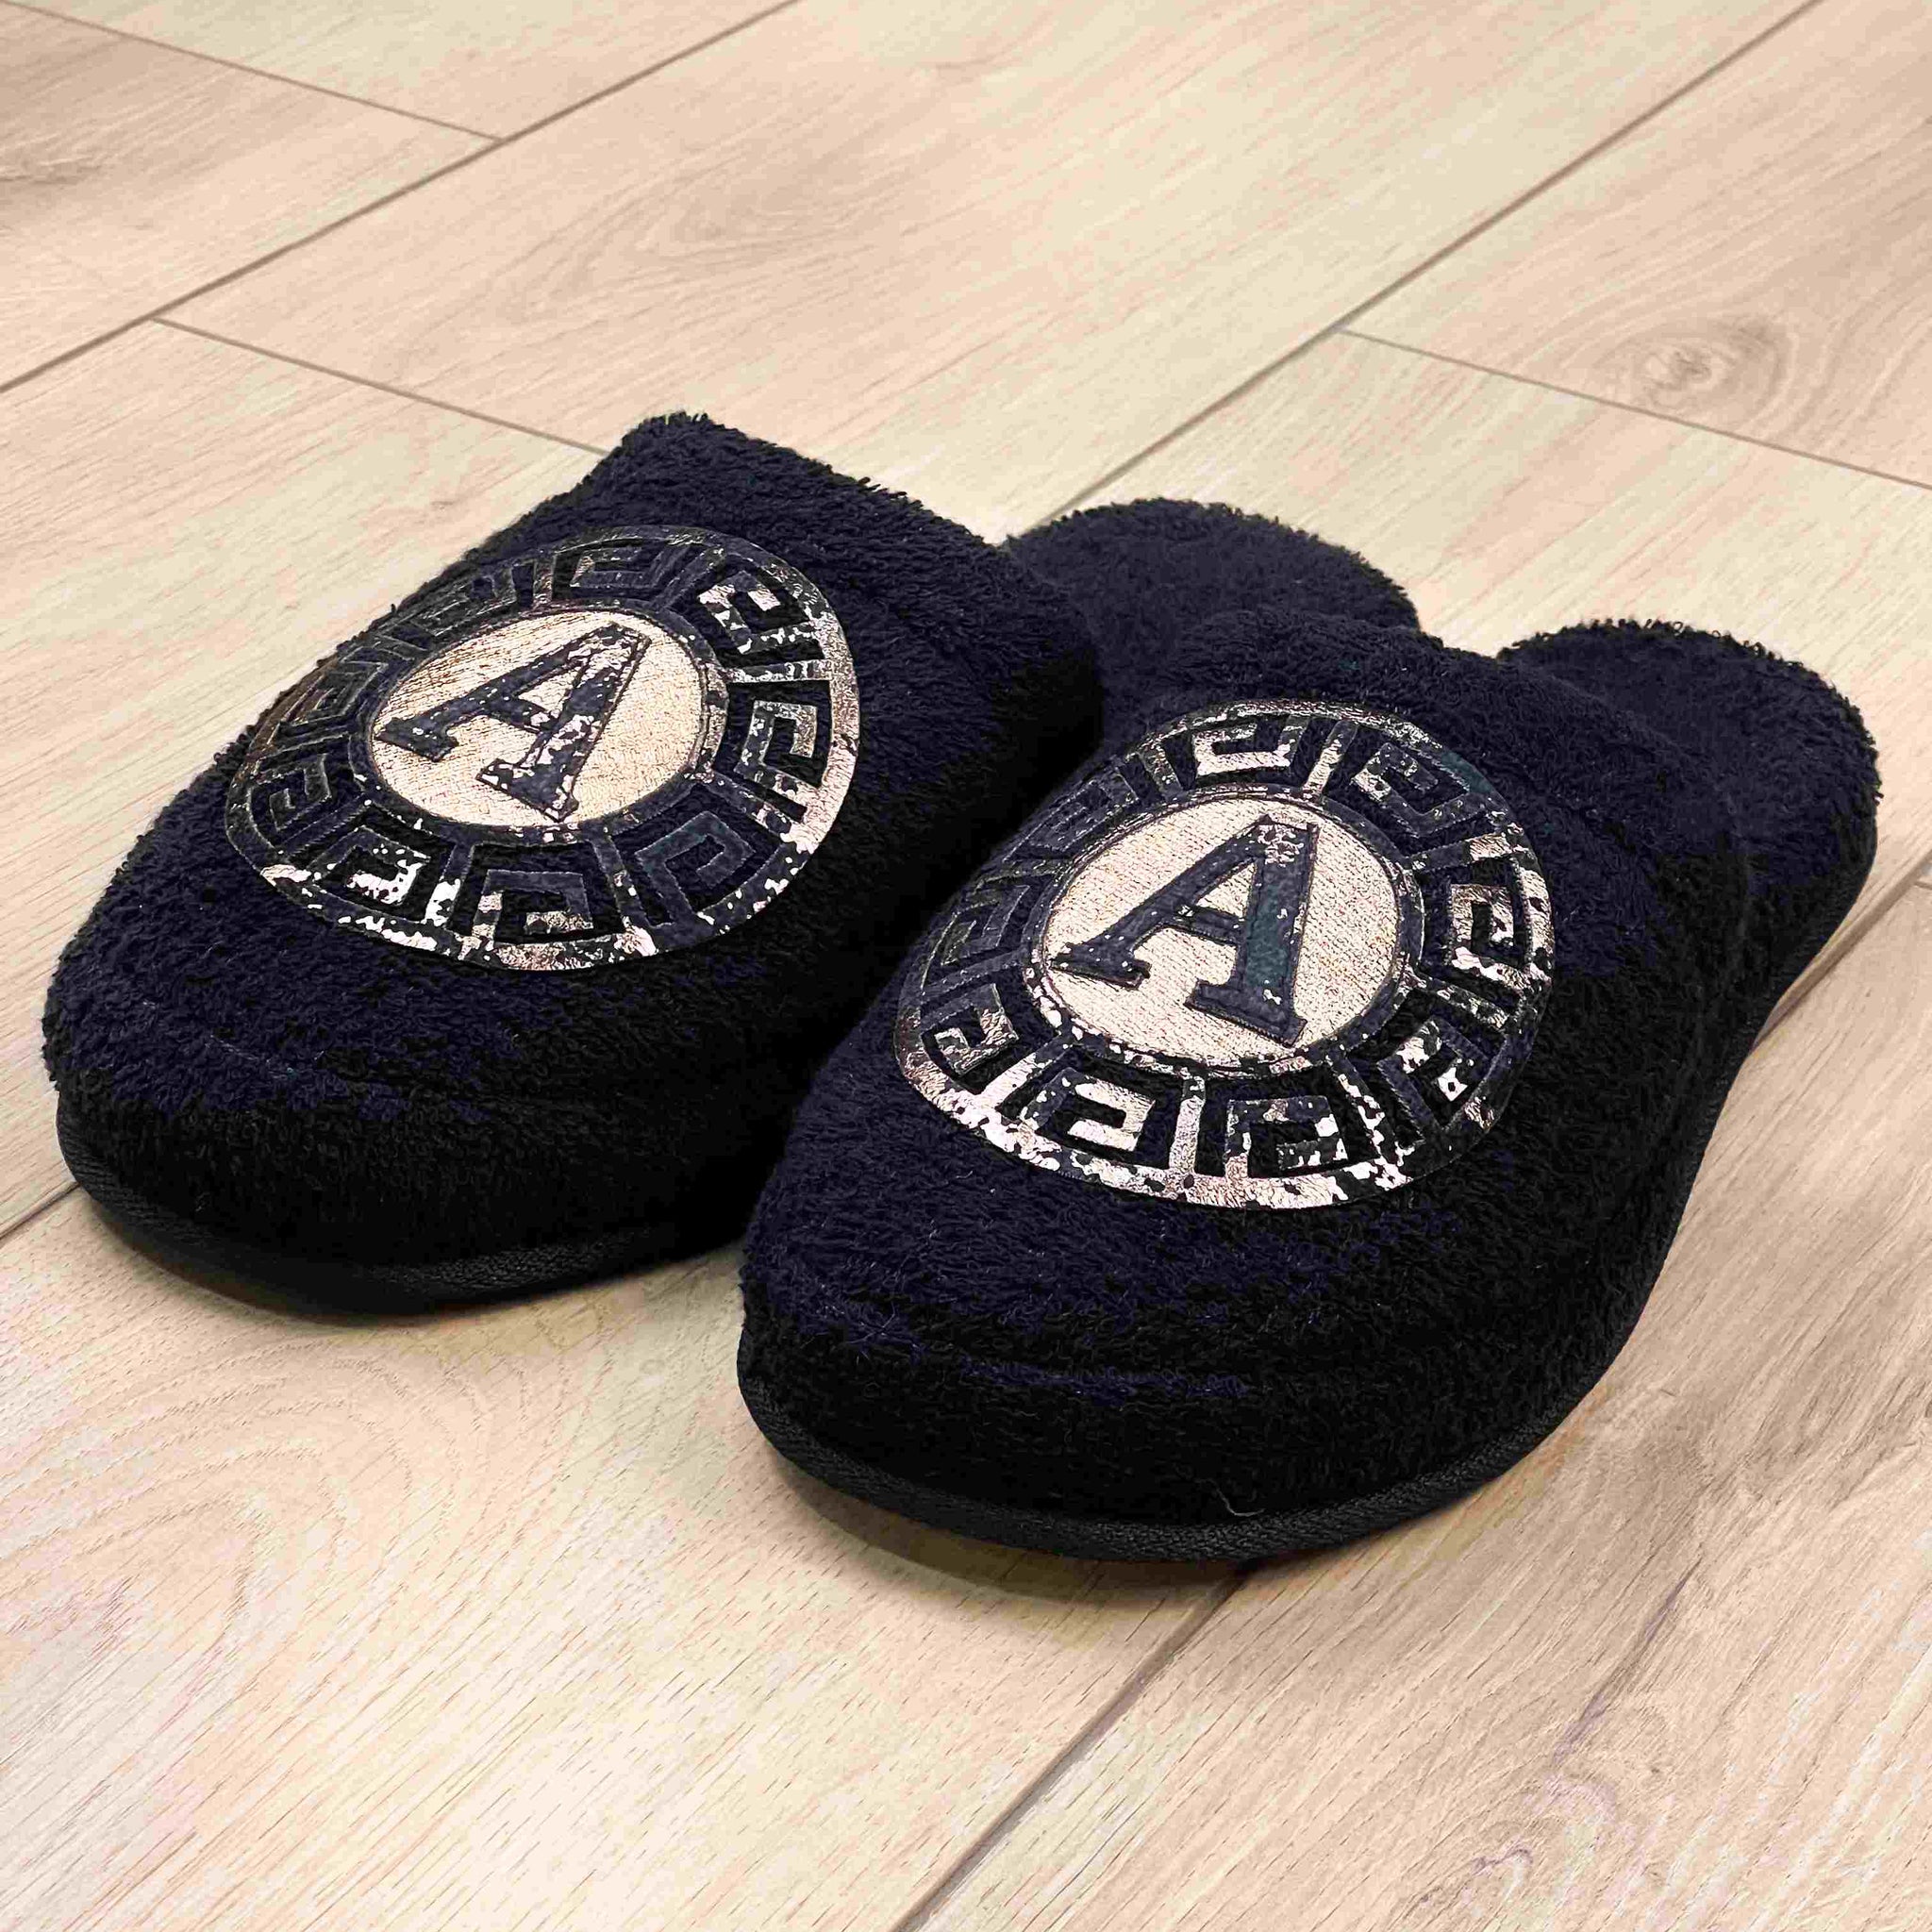 Kaan Men's Custom Monogram Slippers, Soft House & Spa Terry Slippers with Initials by Creative Home,SLPM-CH-KAAN-BlaCop-4244,SLPM-CH-KAAN-BlaCop-4547